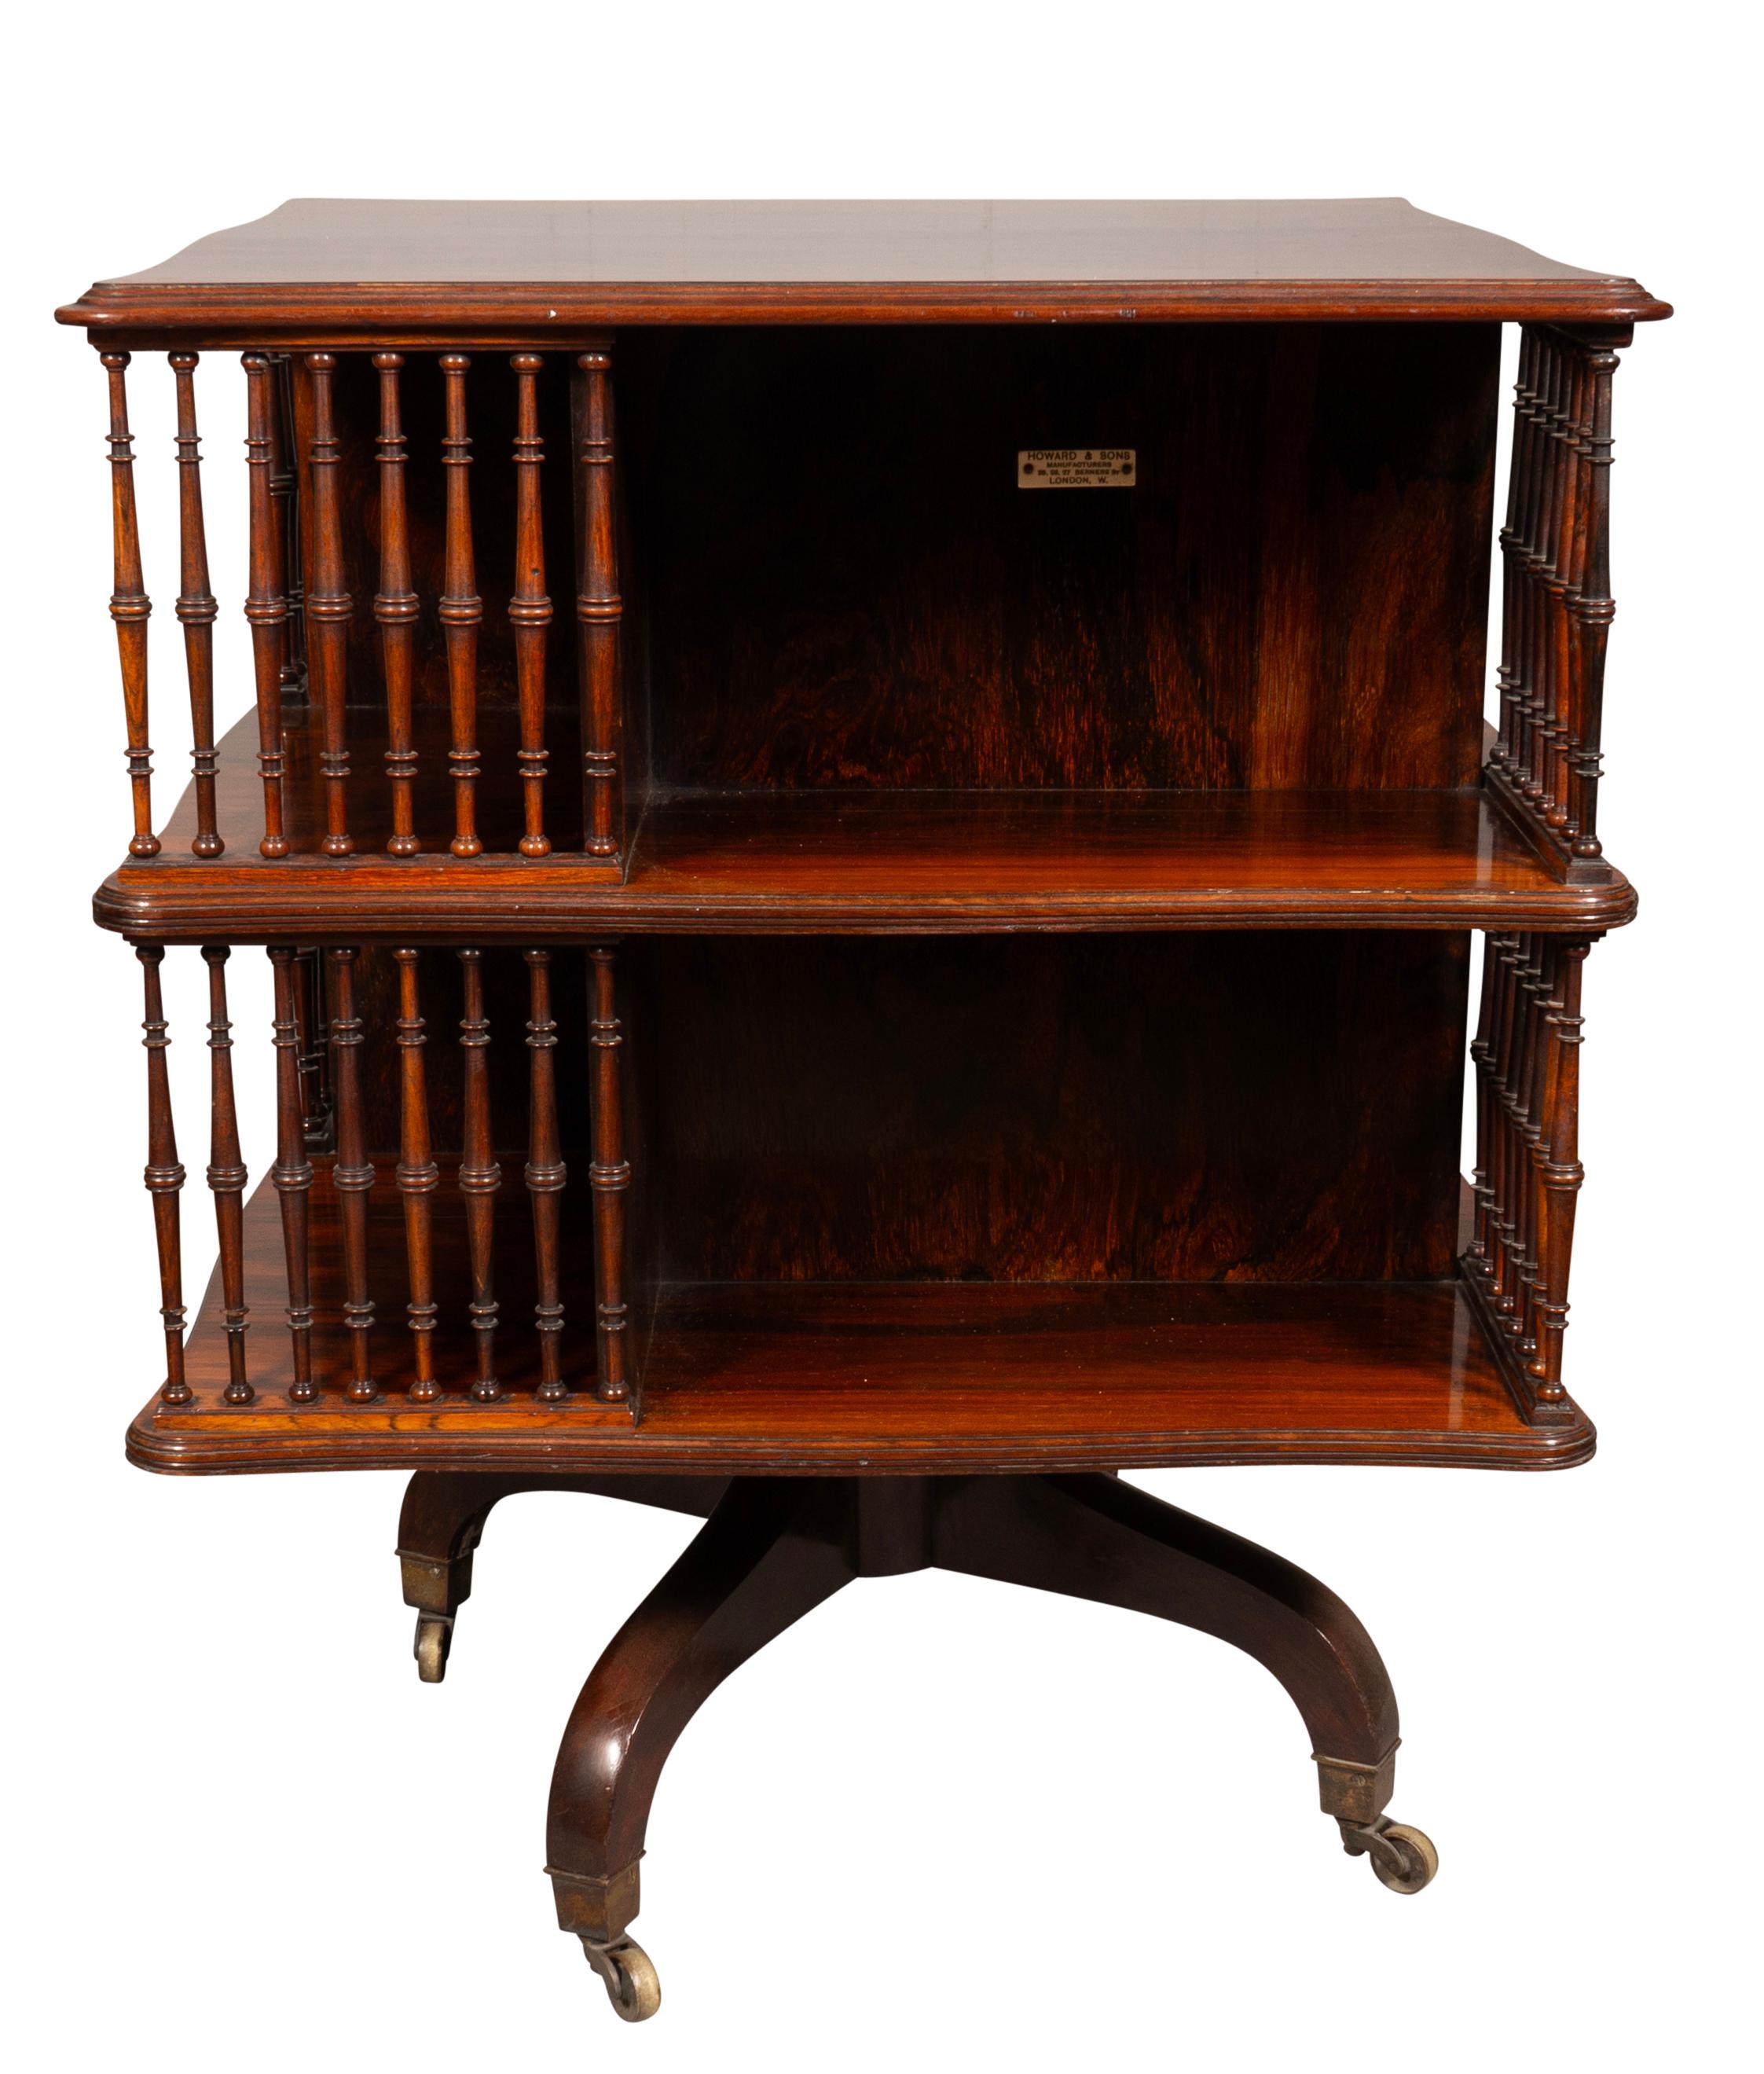 Square with serpentine edge. conforming lower shelf with spindles and book storage. Raised on saber legs and casters. Signed in celluloid plaque Howard & Sons. London.